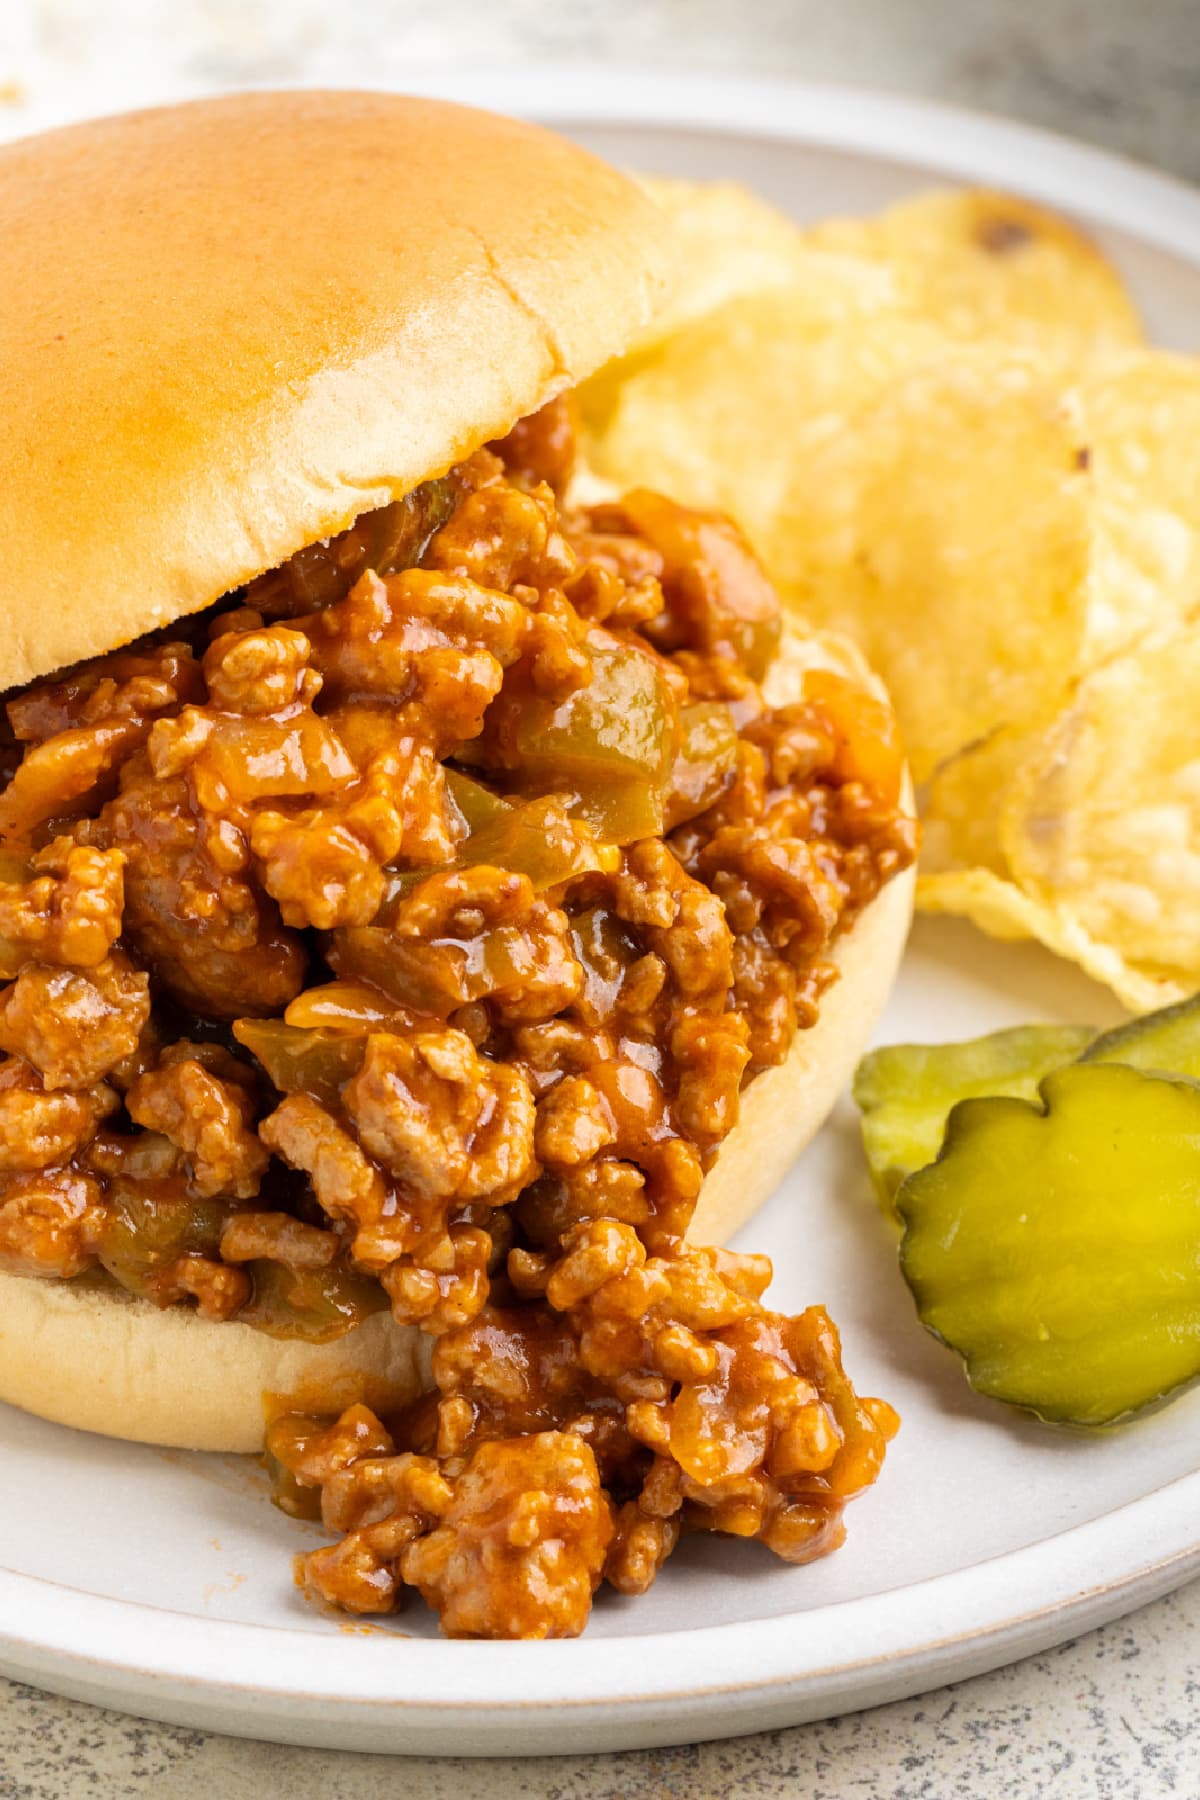 Turkey Sloppy Joes on a plate with chips and pickles